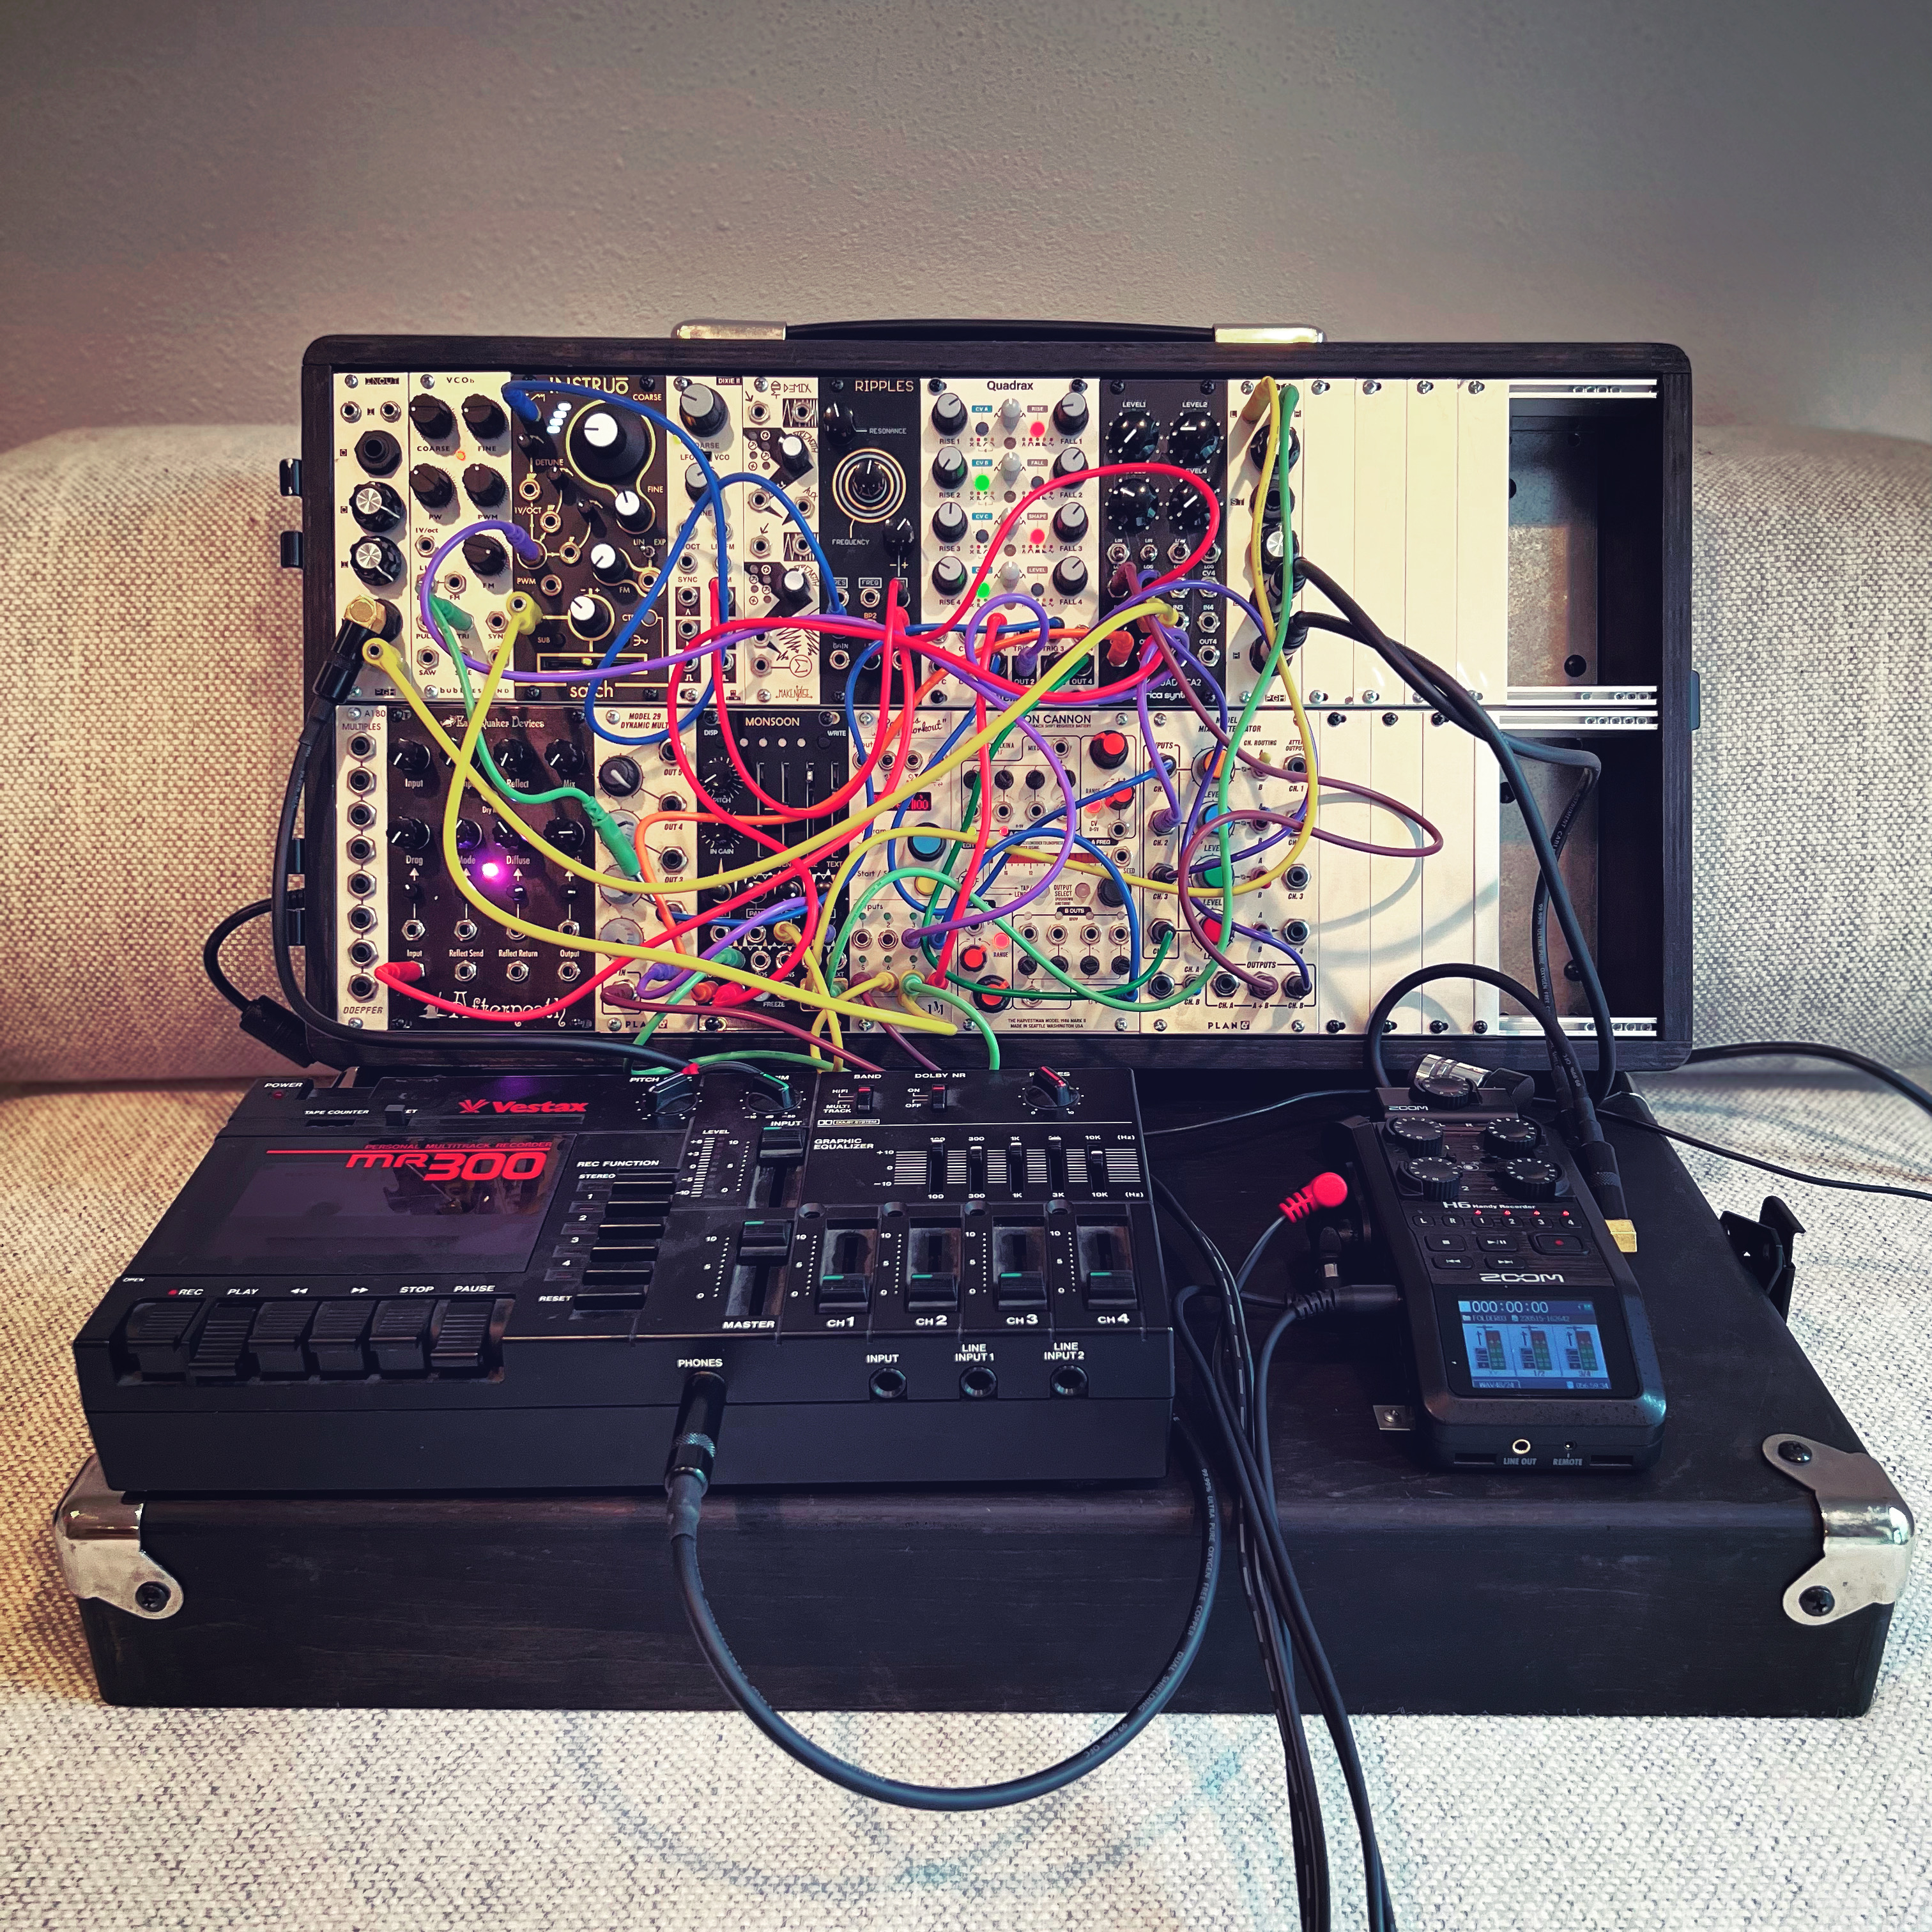 a modular synthesizer propped up on a couch, connected to a 4 track recorder and a digital multichannel recorder